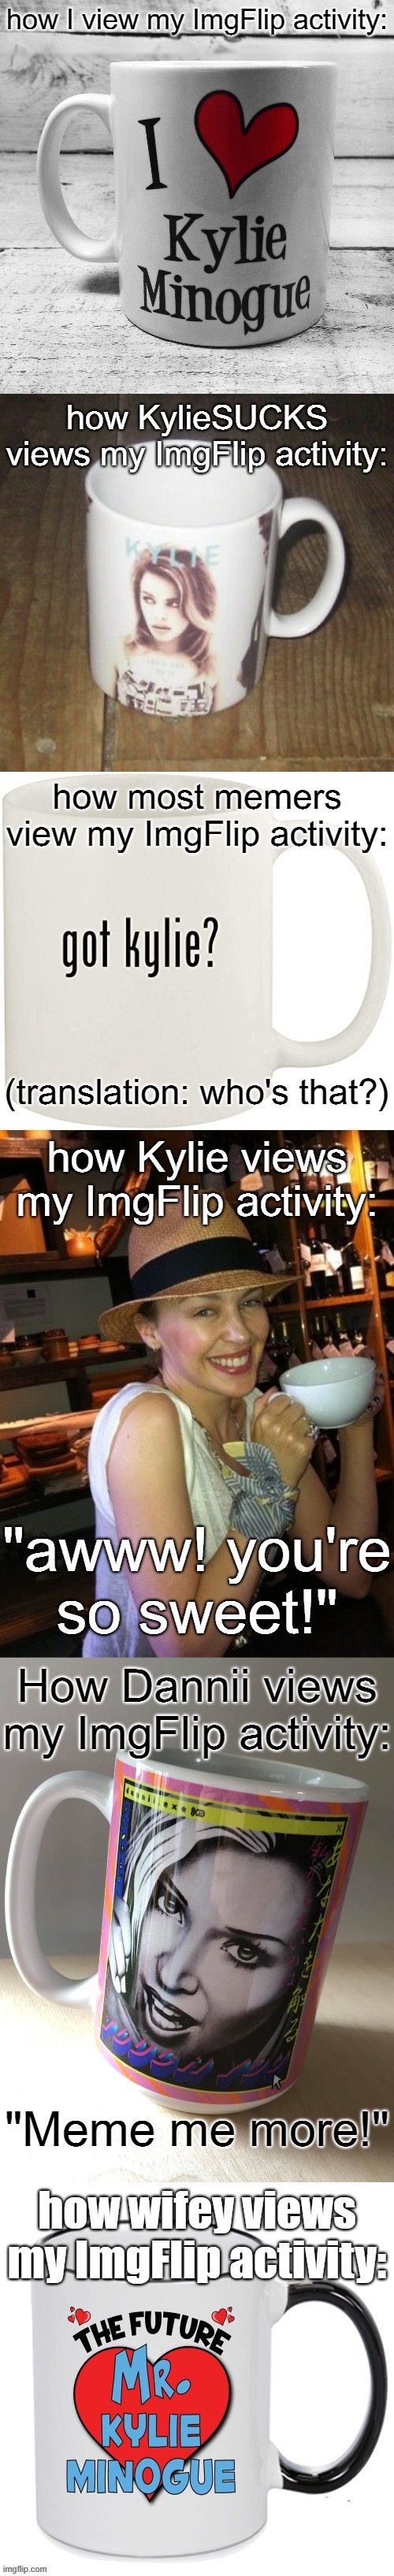 A caffeinated tour of Kamikaze lore. | image tagged in imgflipper,imgflip humor,imgflip user,memes about memeing,memes about memes,coffee | made w/ Imgflip meme maker